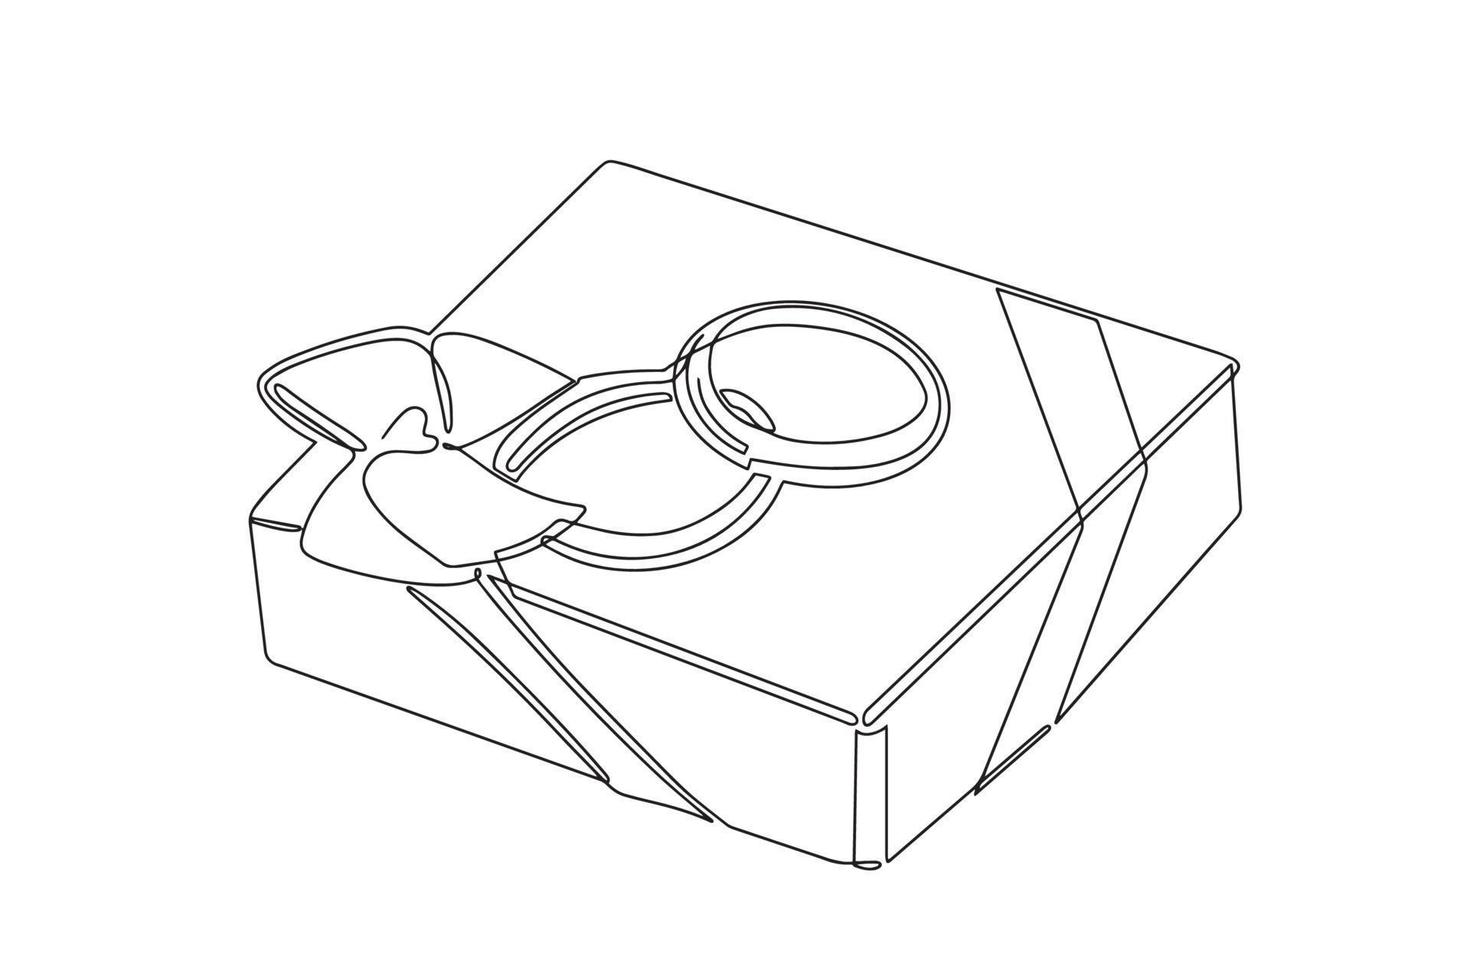 Wedding rings on a gift box with a bow. Continuous drawing in one line. vector